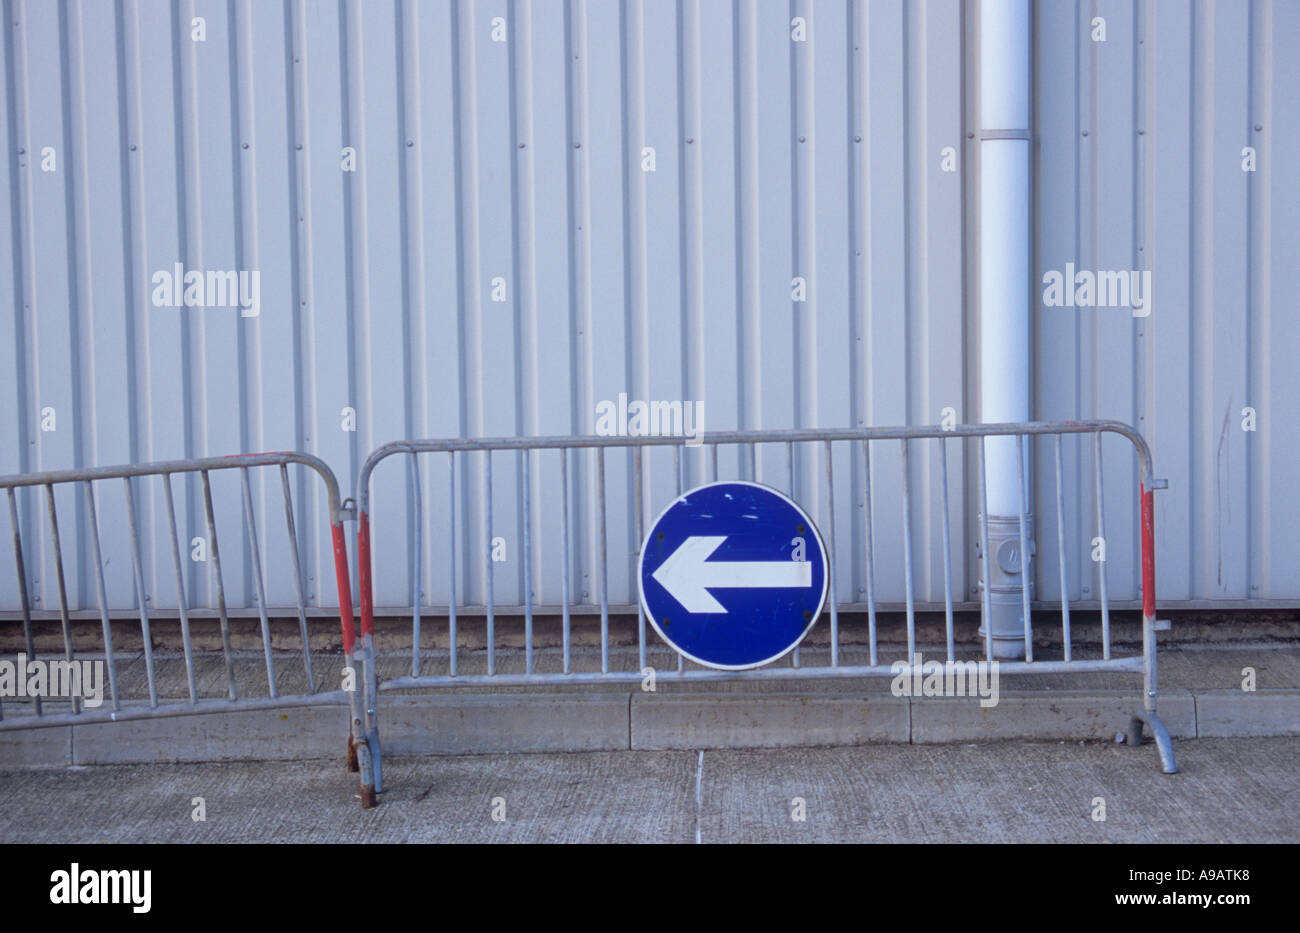 Traffic barrier or mobile railing with blue and white Turn or Keep left sign in front of pale grey slatted warehouse walls Stock Photo